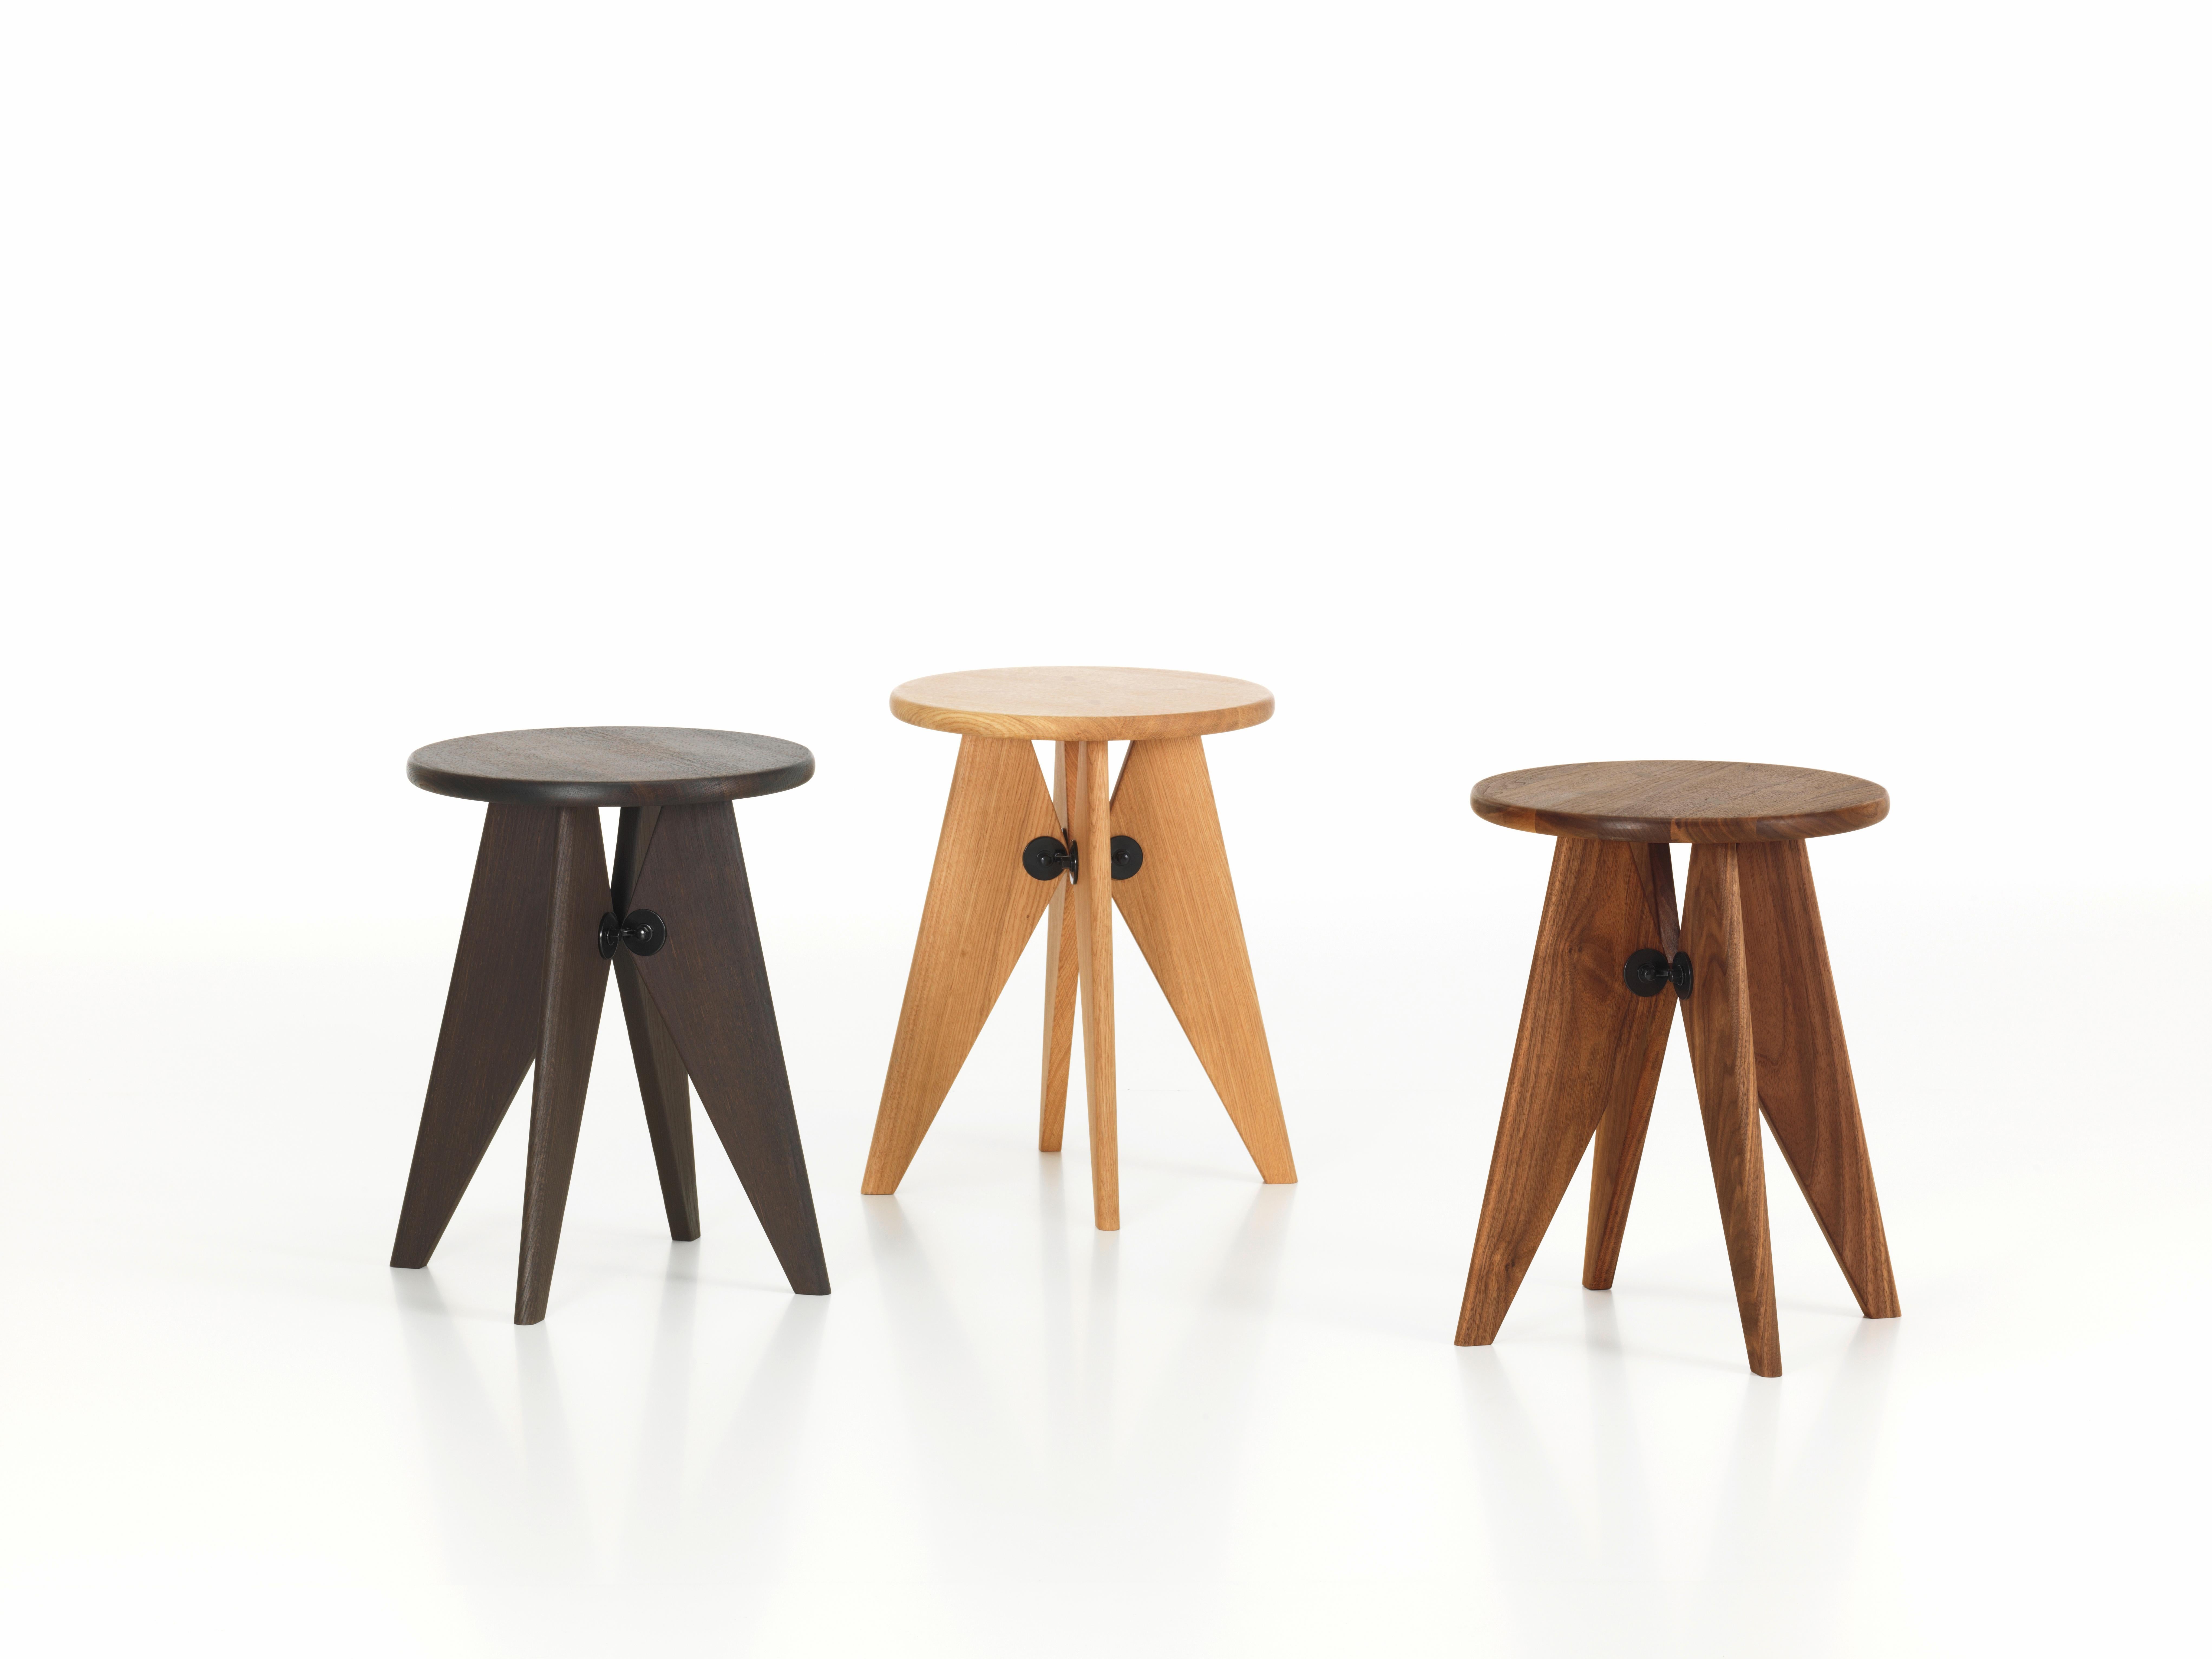 Tabouret Solvay is a simple, robust stool made of solid smoked oak (or walnut) that reveals the designer’s signature at first glance: its clear structural principles can be found throughout the work of Jean Prouvé. Thanks to the flat, even surface